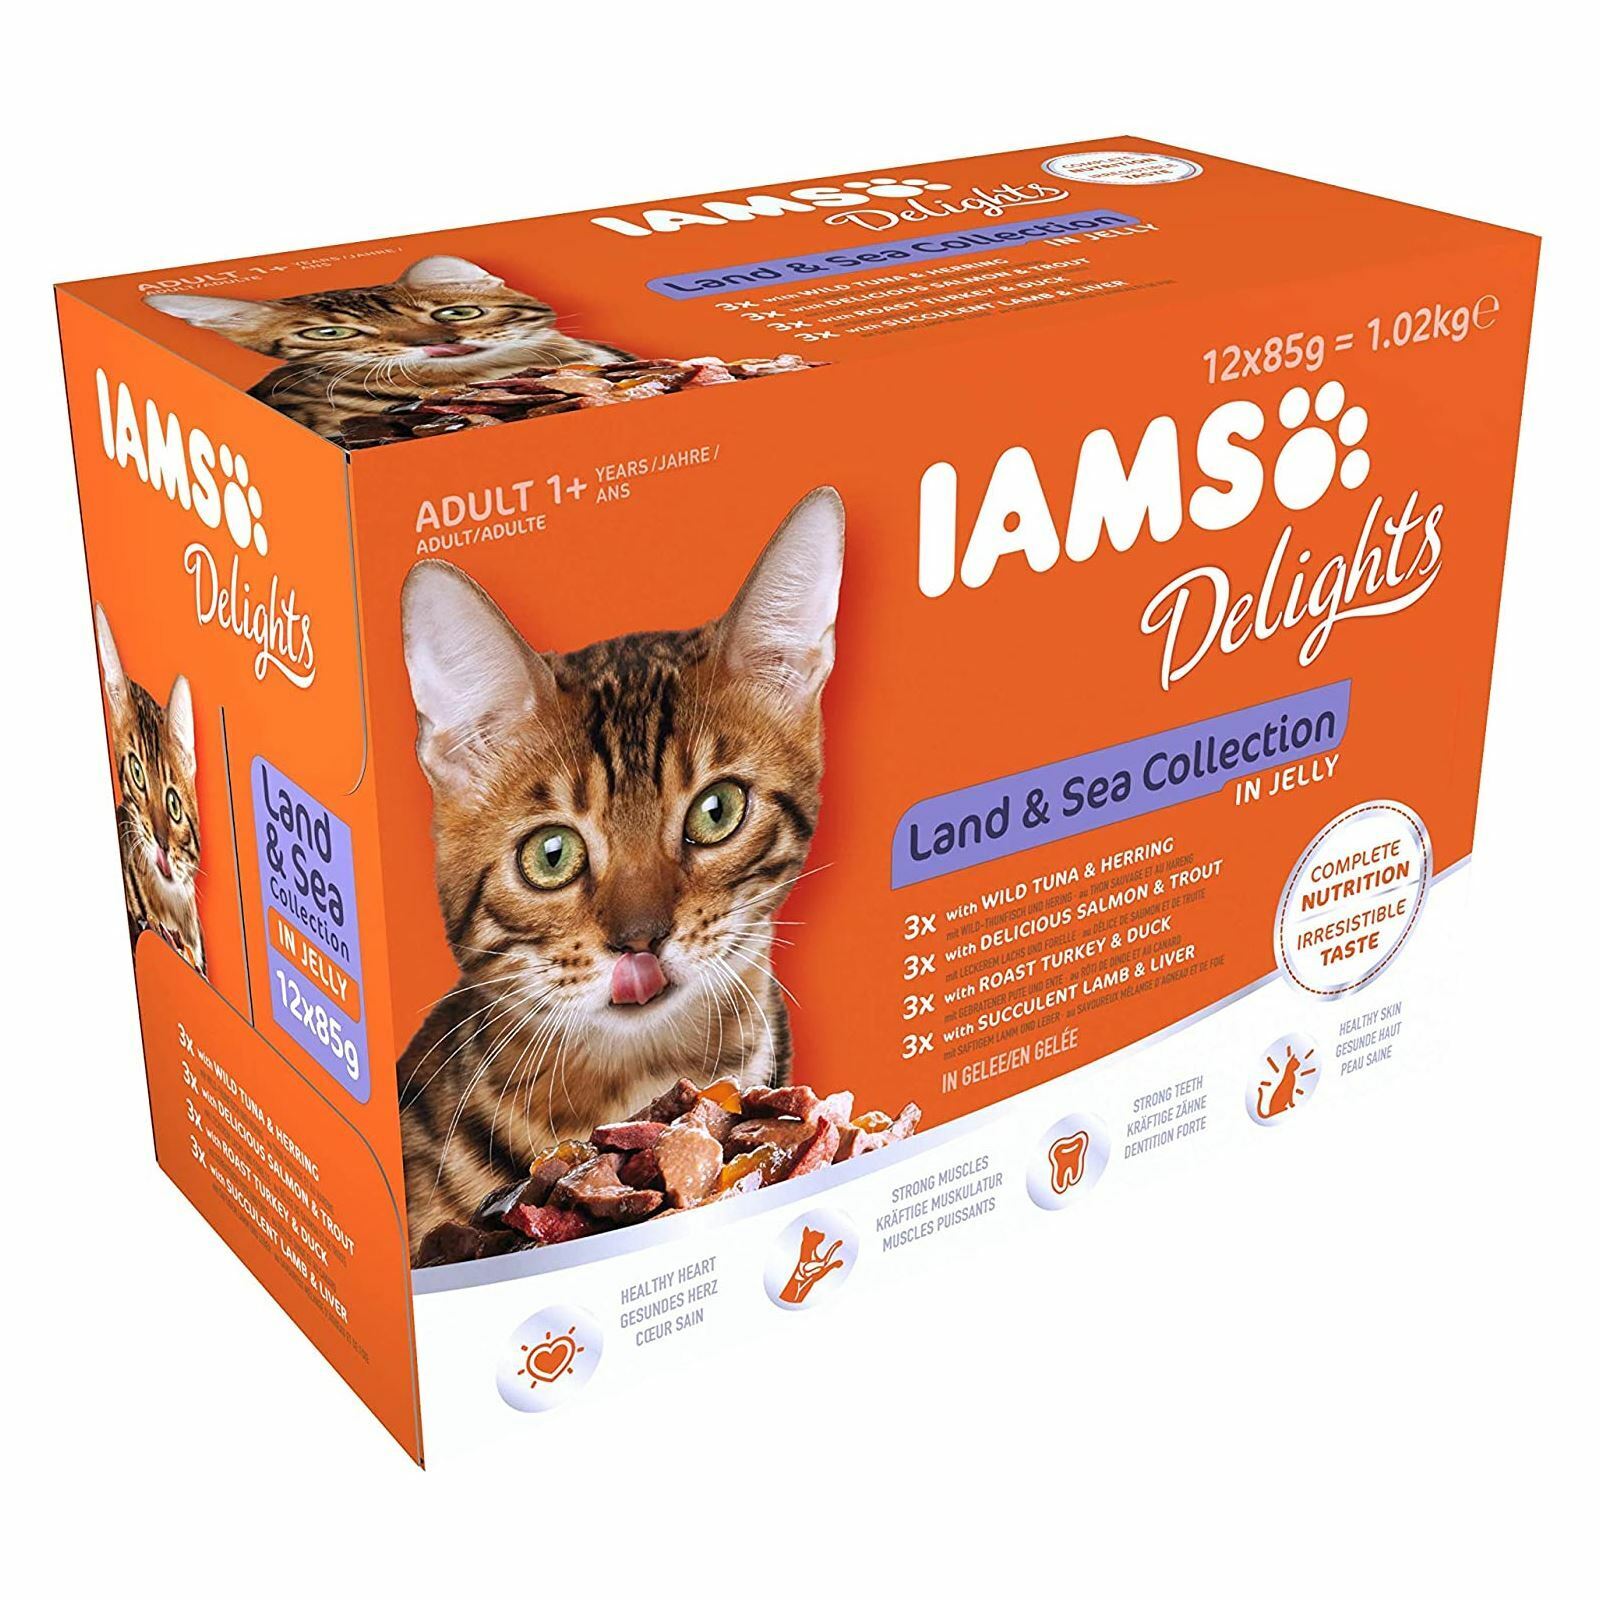 IAMS Delights Wet Food Land and Sea Collection